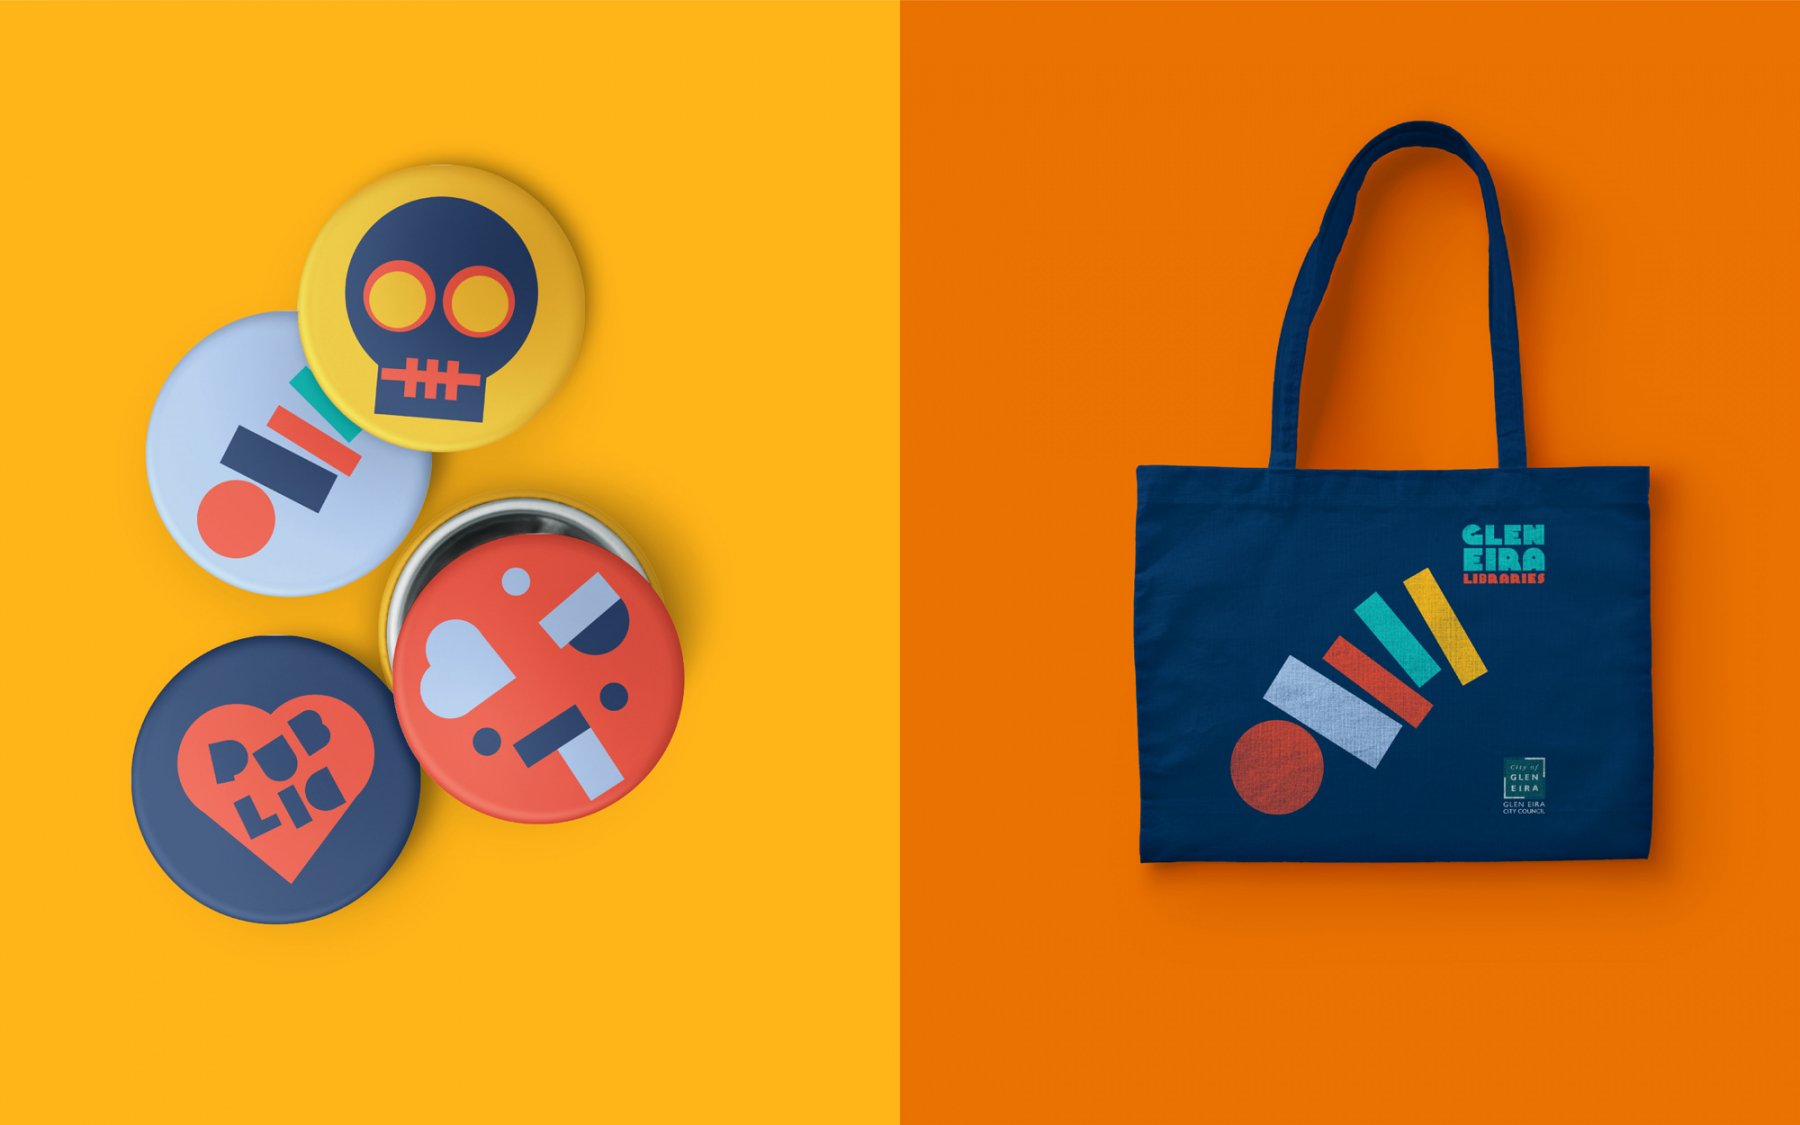 Glen Eira Libraries branded promotional items, tote bag and badges